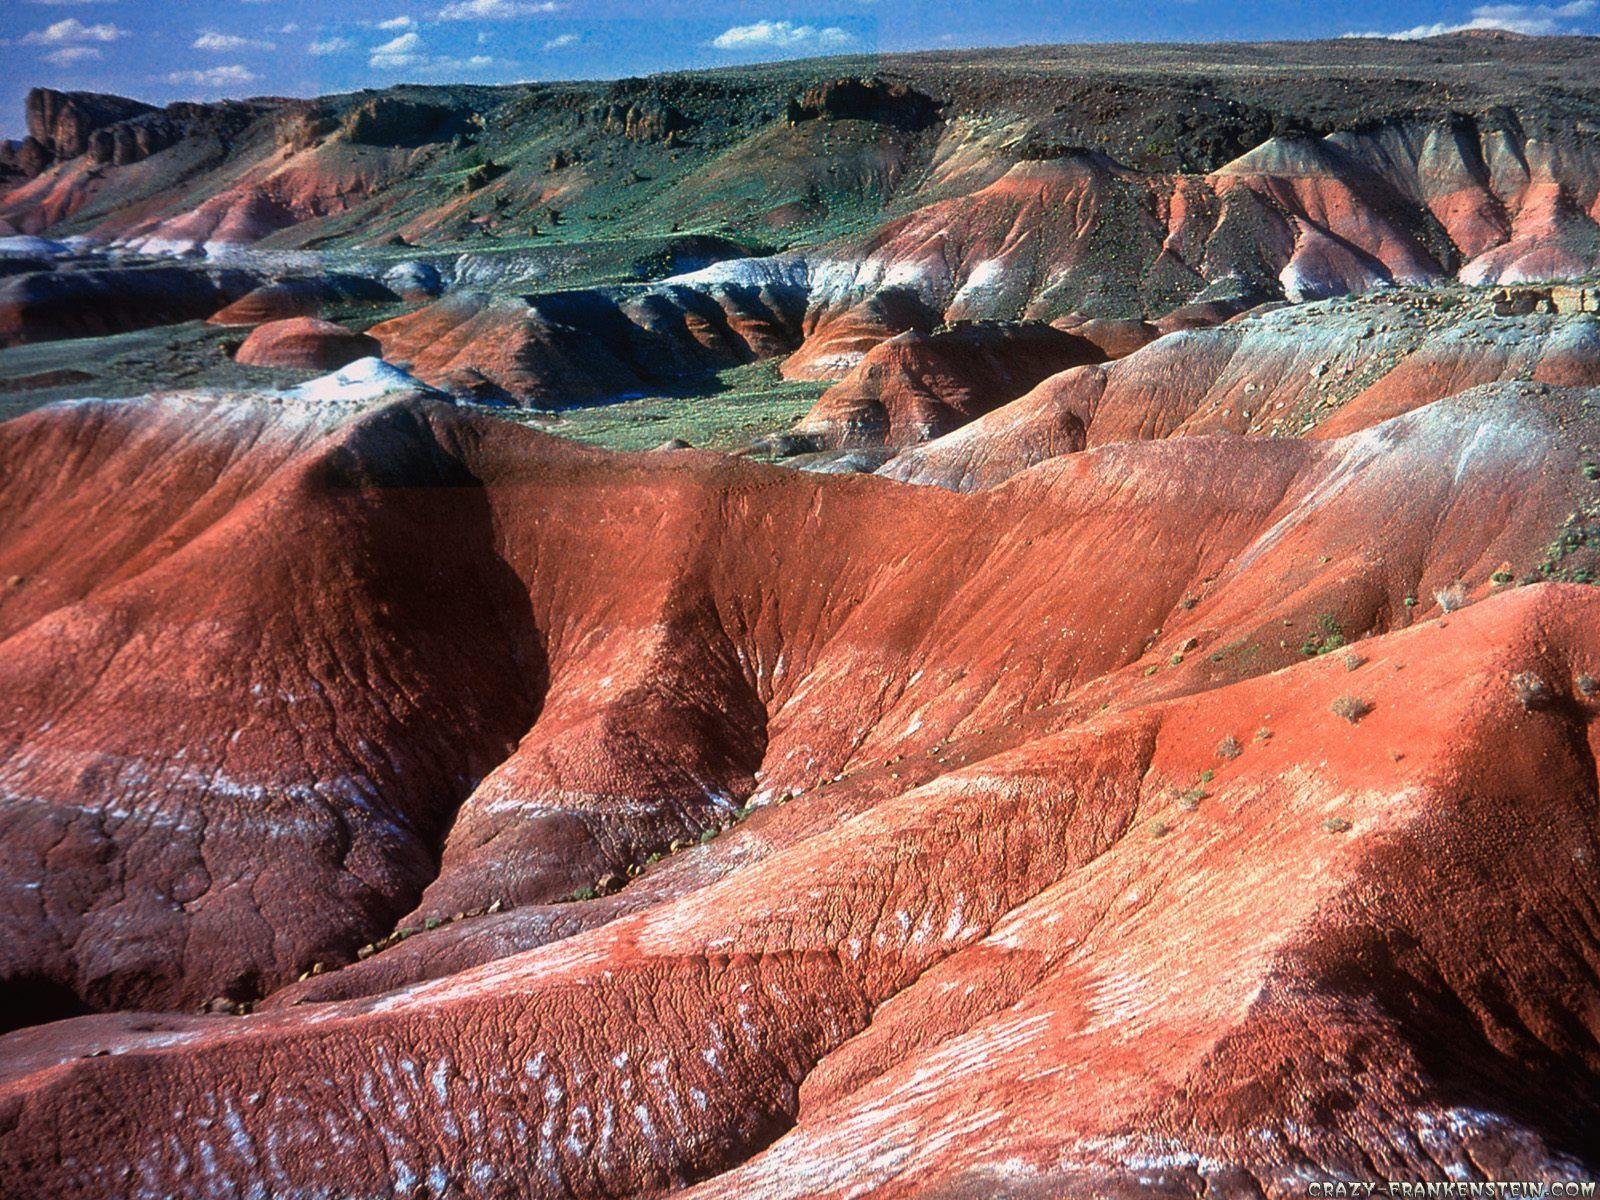 Painted Desert, Arizona. One of the places you have to see